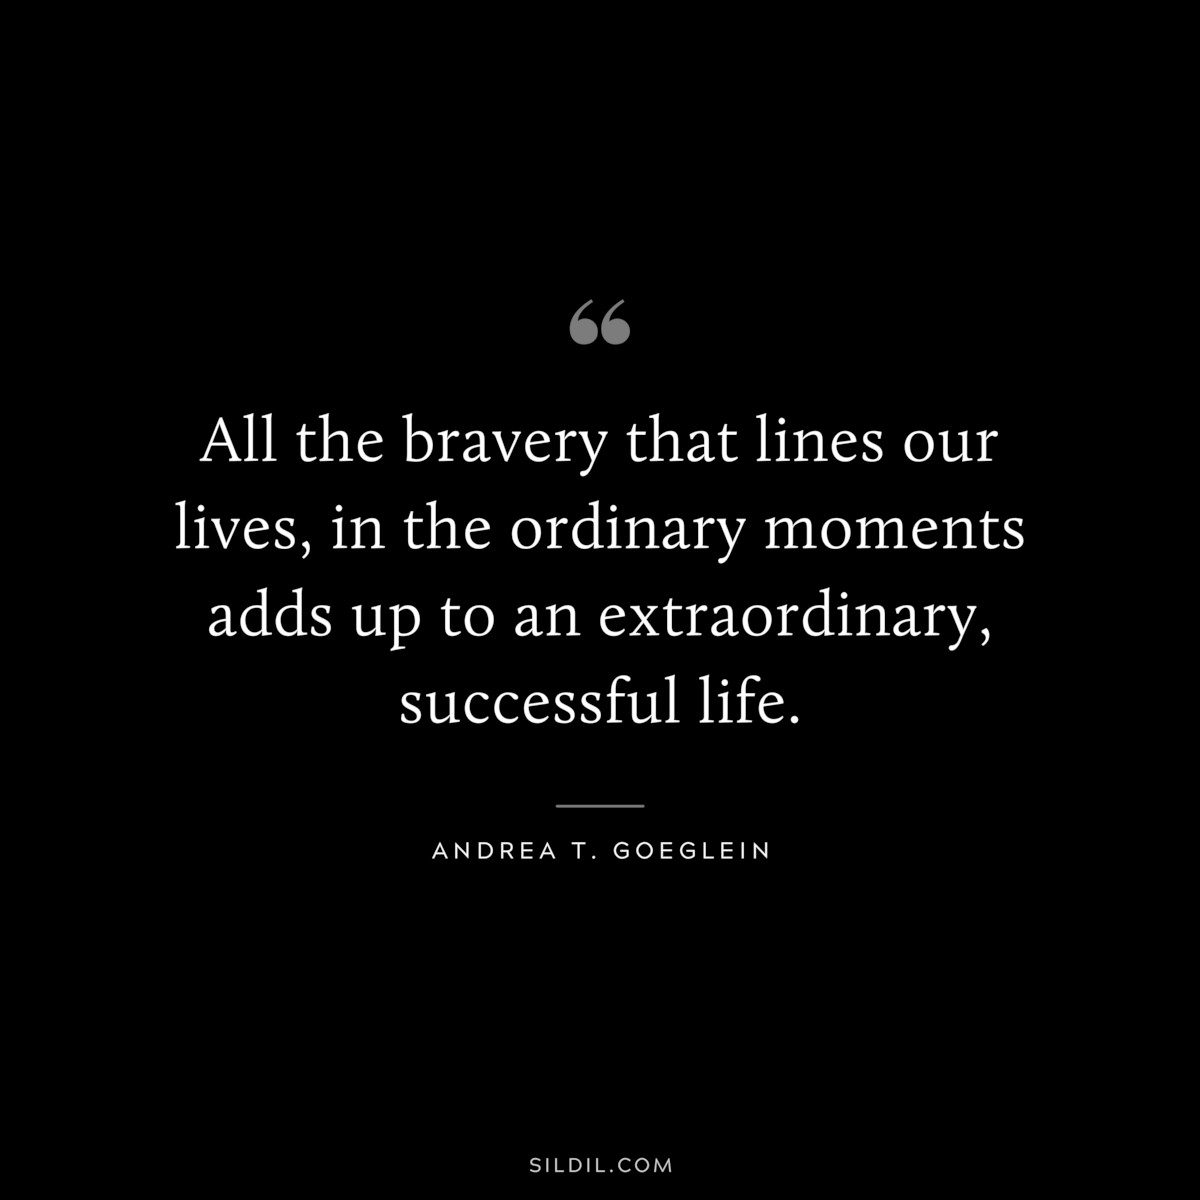 All the bravery that lines our lives, in the ordinary moments adds up to an extraordinary, successful life. ― Andrea T. Goeglein